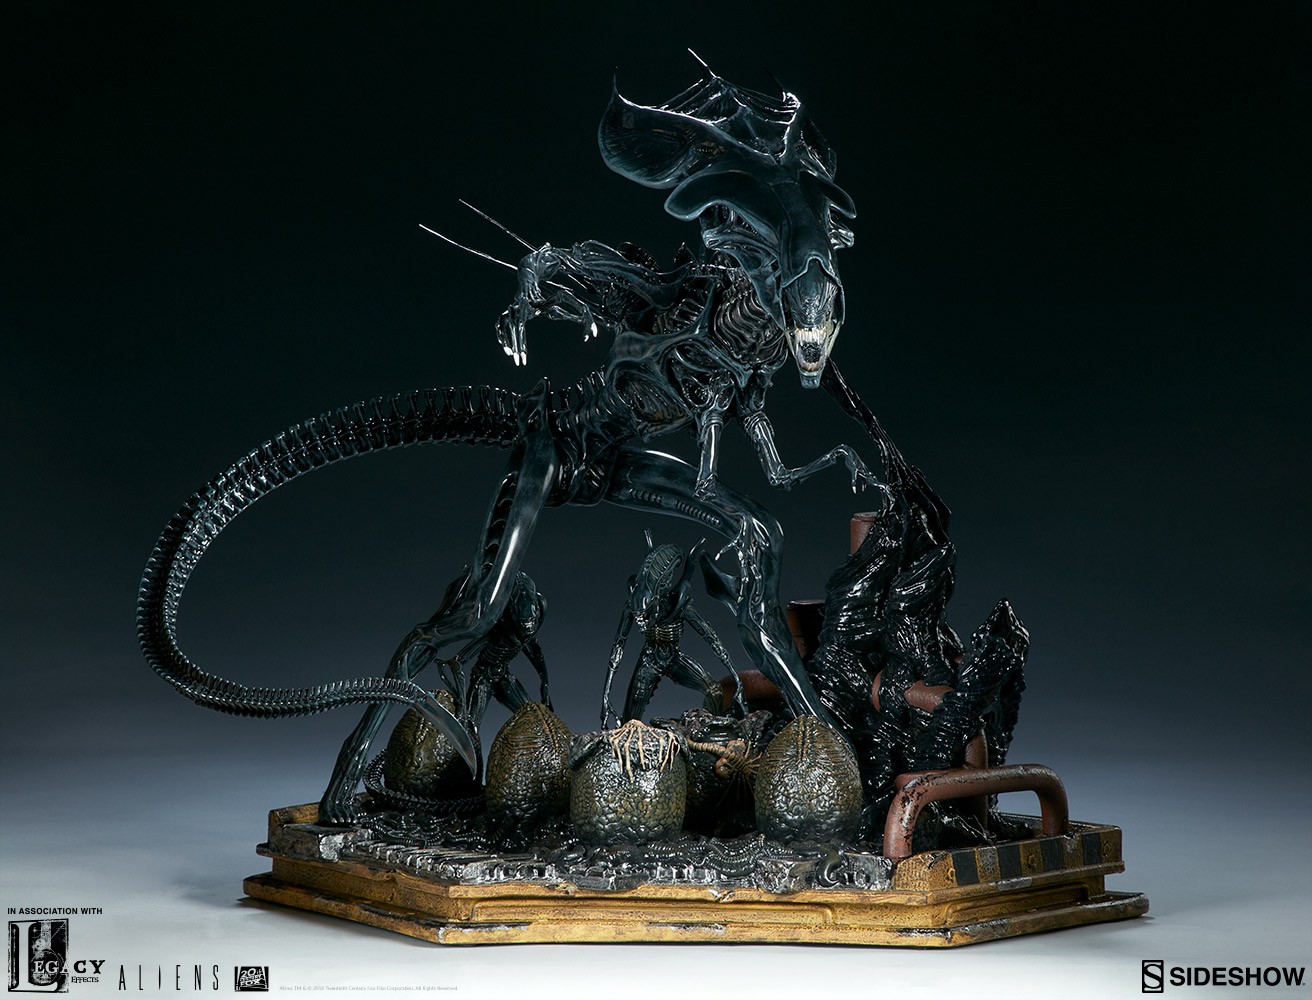 Aliens Alien Queen Maquette by Sideshow Collectibles | Sideshow 